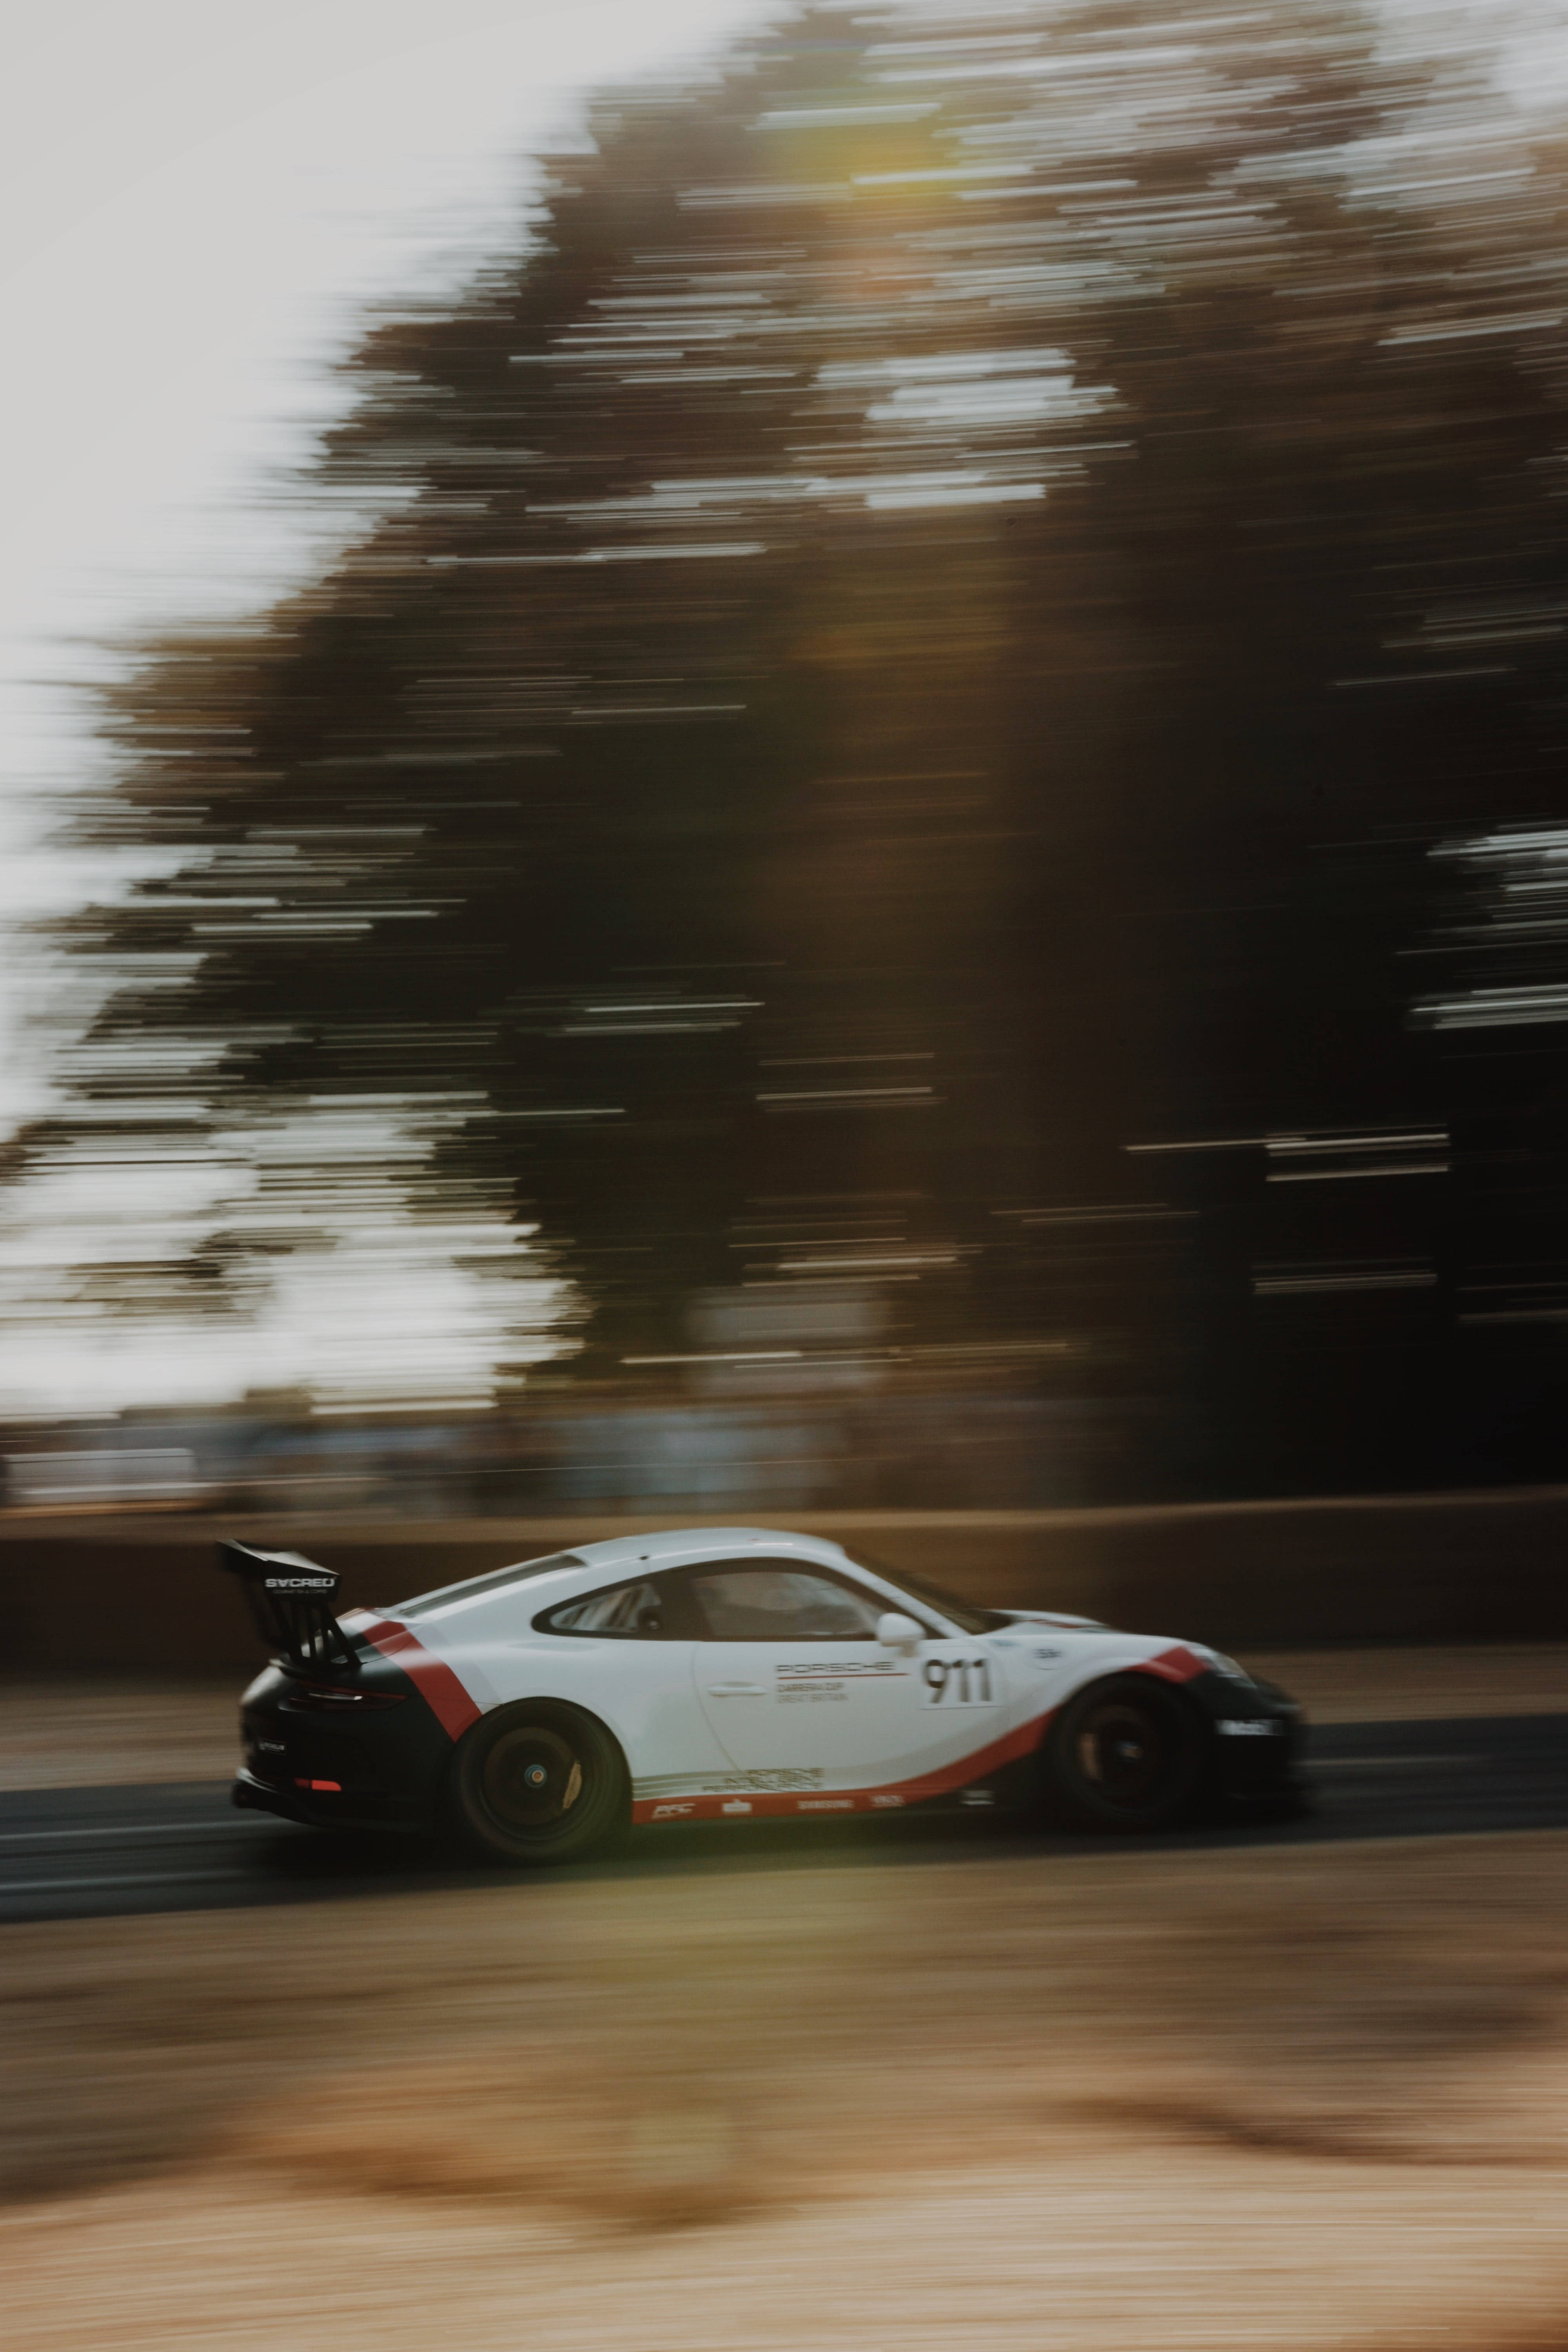 Awesome White Racecar Speed Iphone Wallpaper